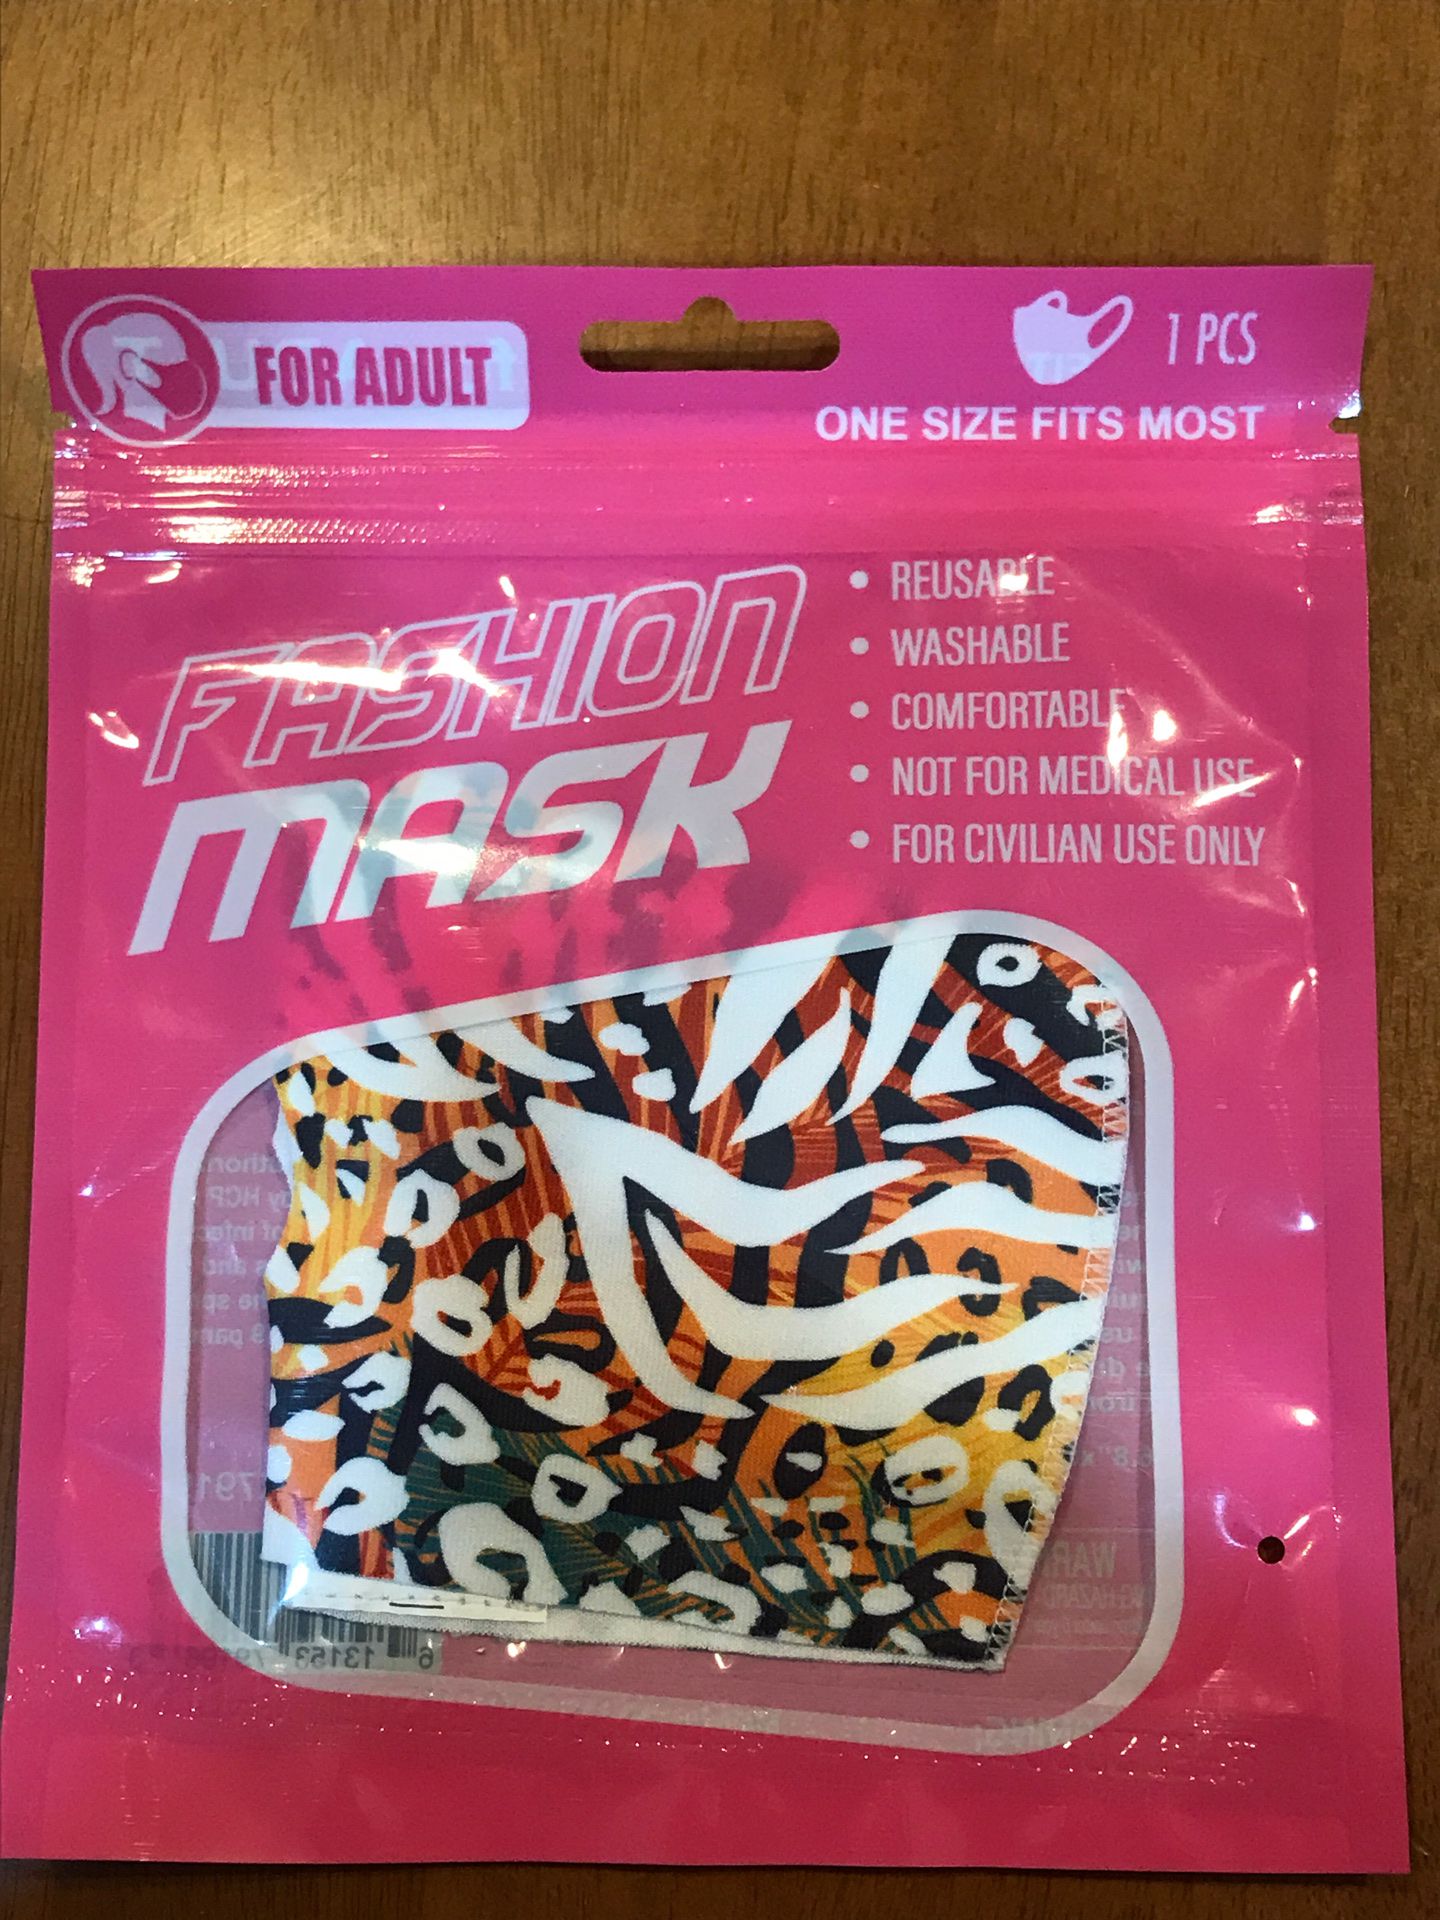 Brand new mask for woman 😷 $2